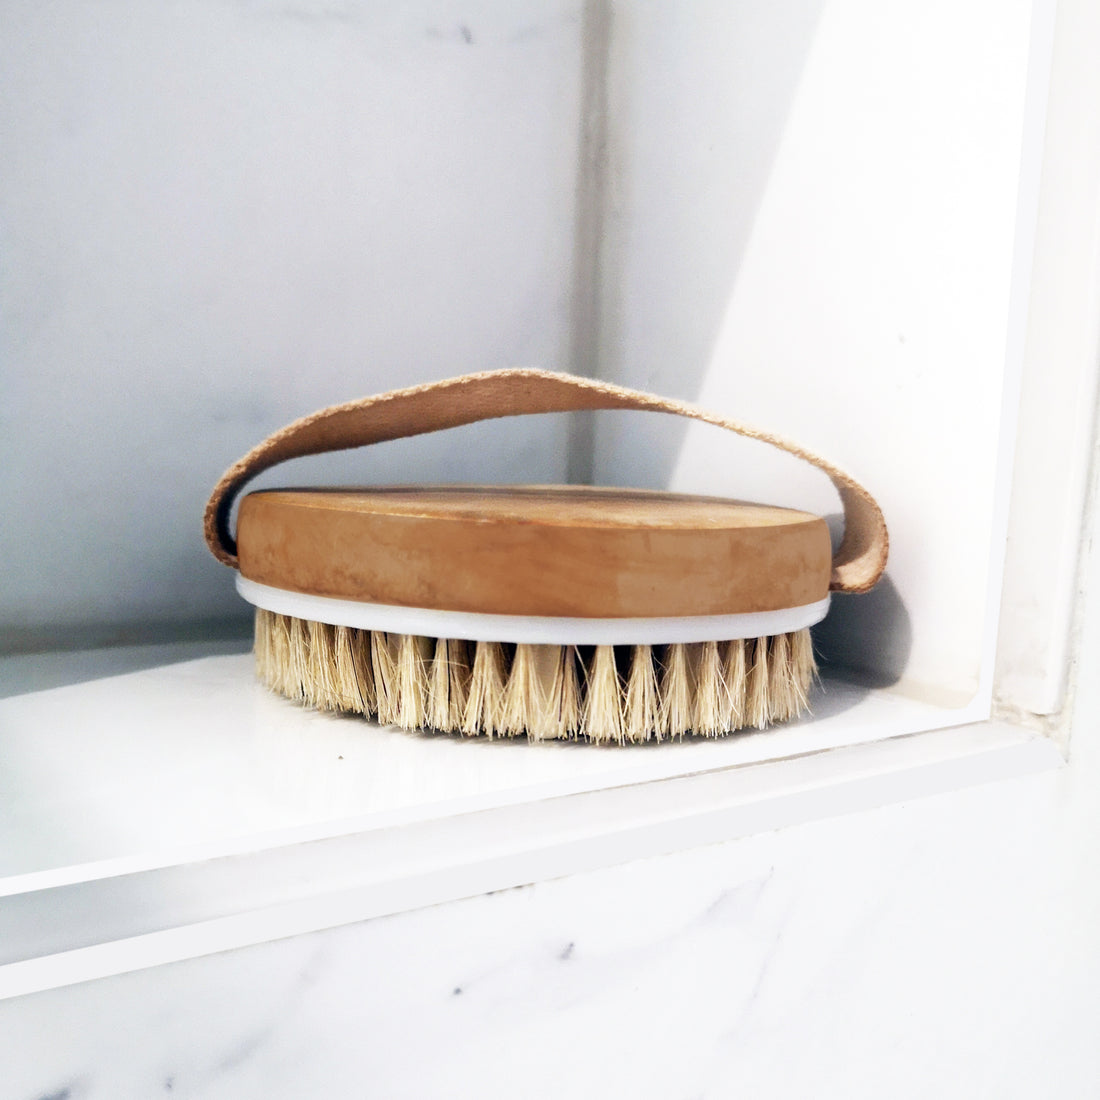 6 ways dry brushing improves your complexion